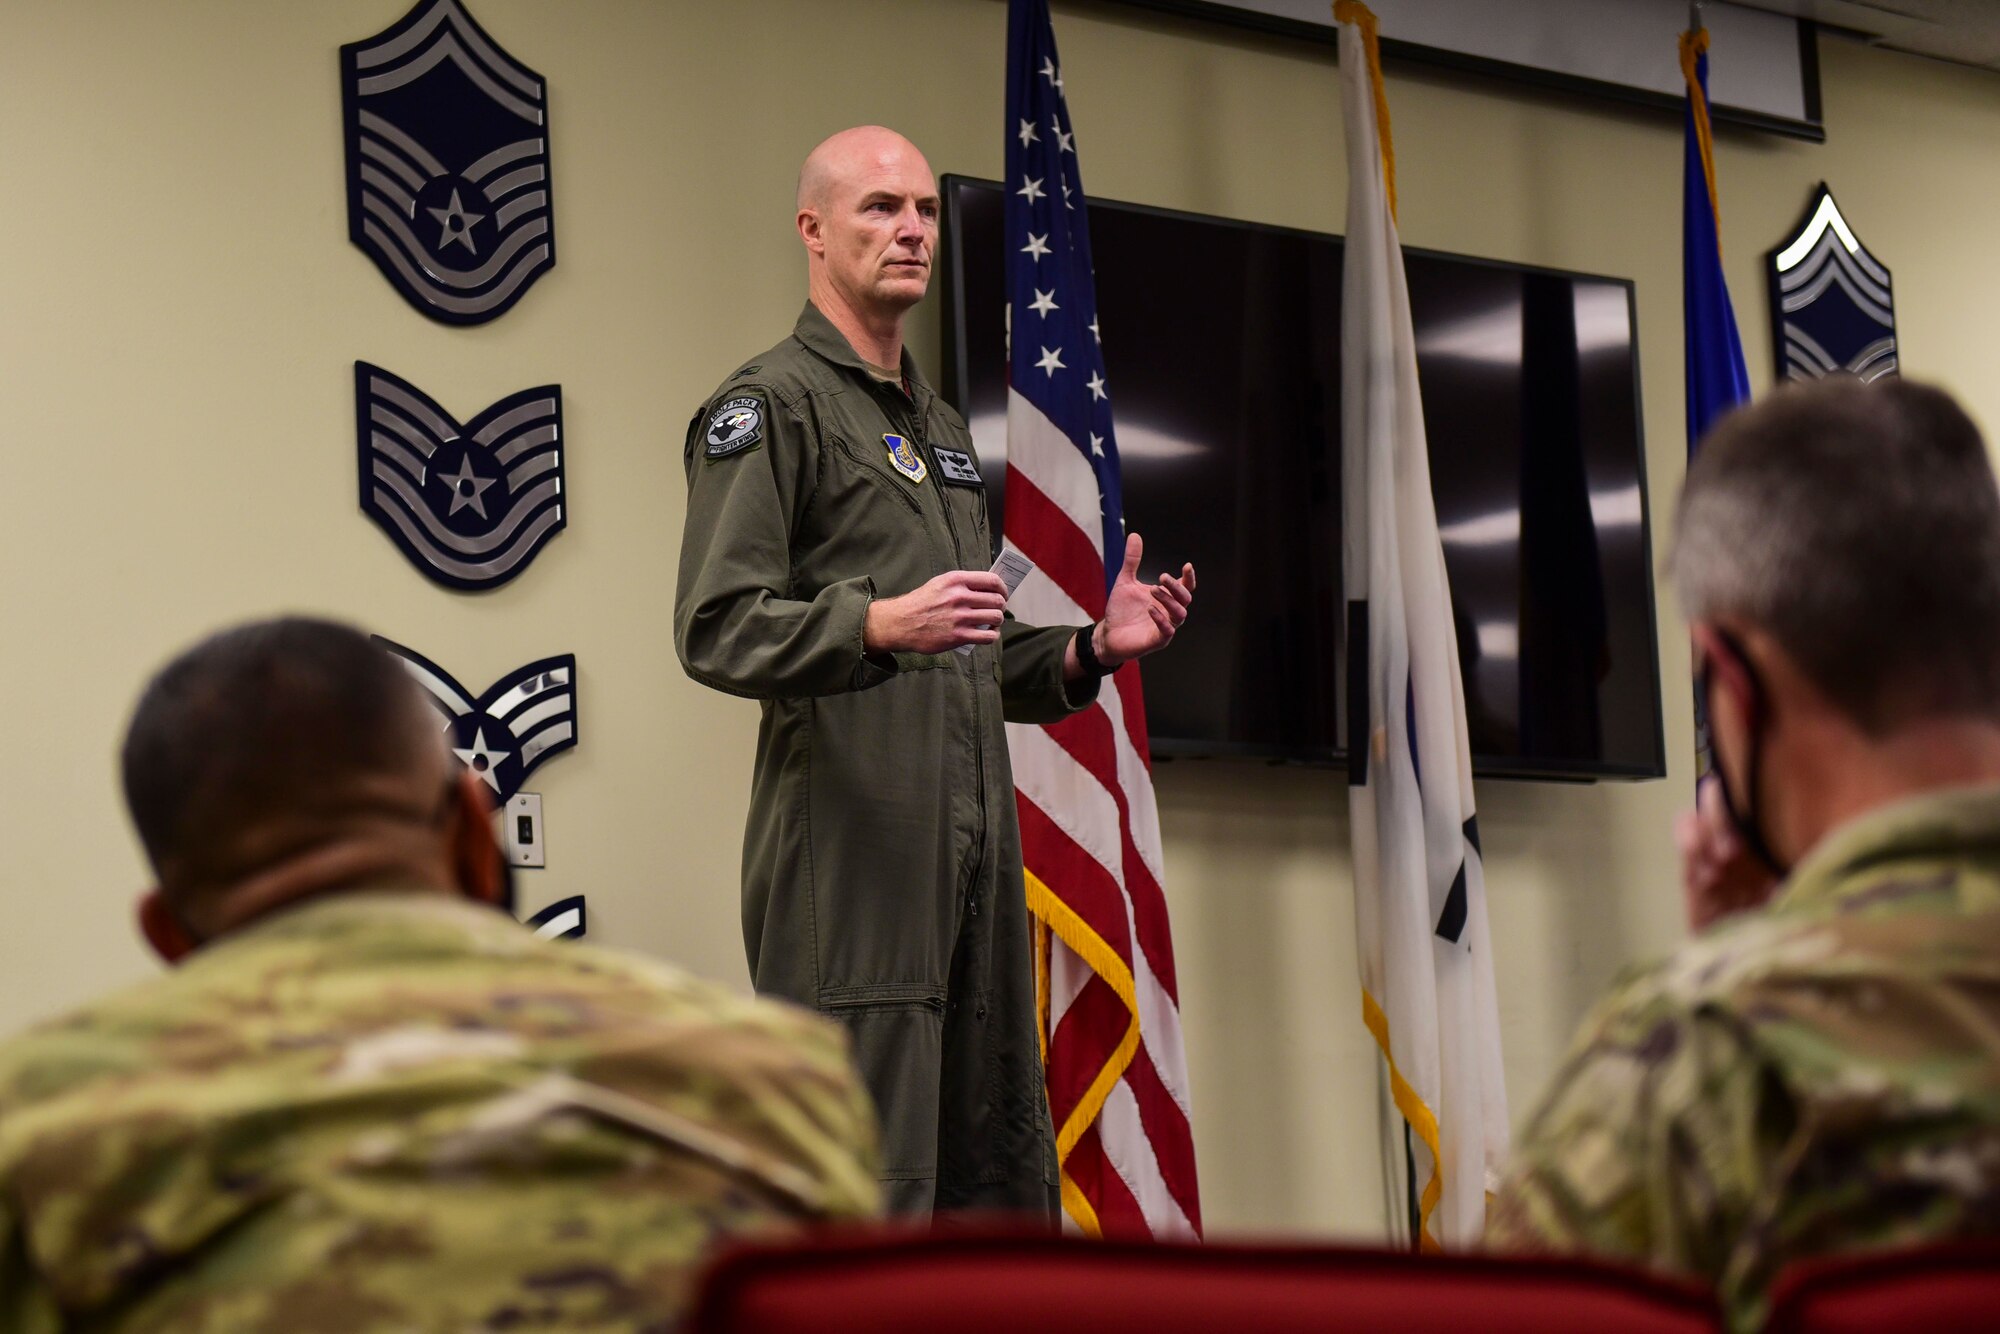 A commander speaking to Airpower Leadership Academy graduates.